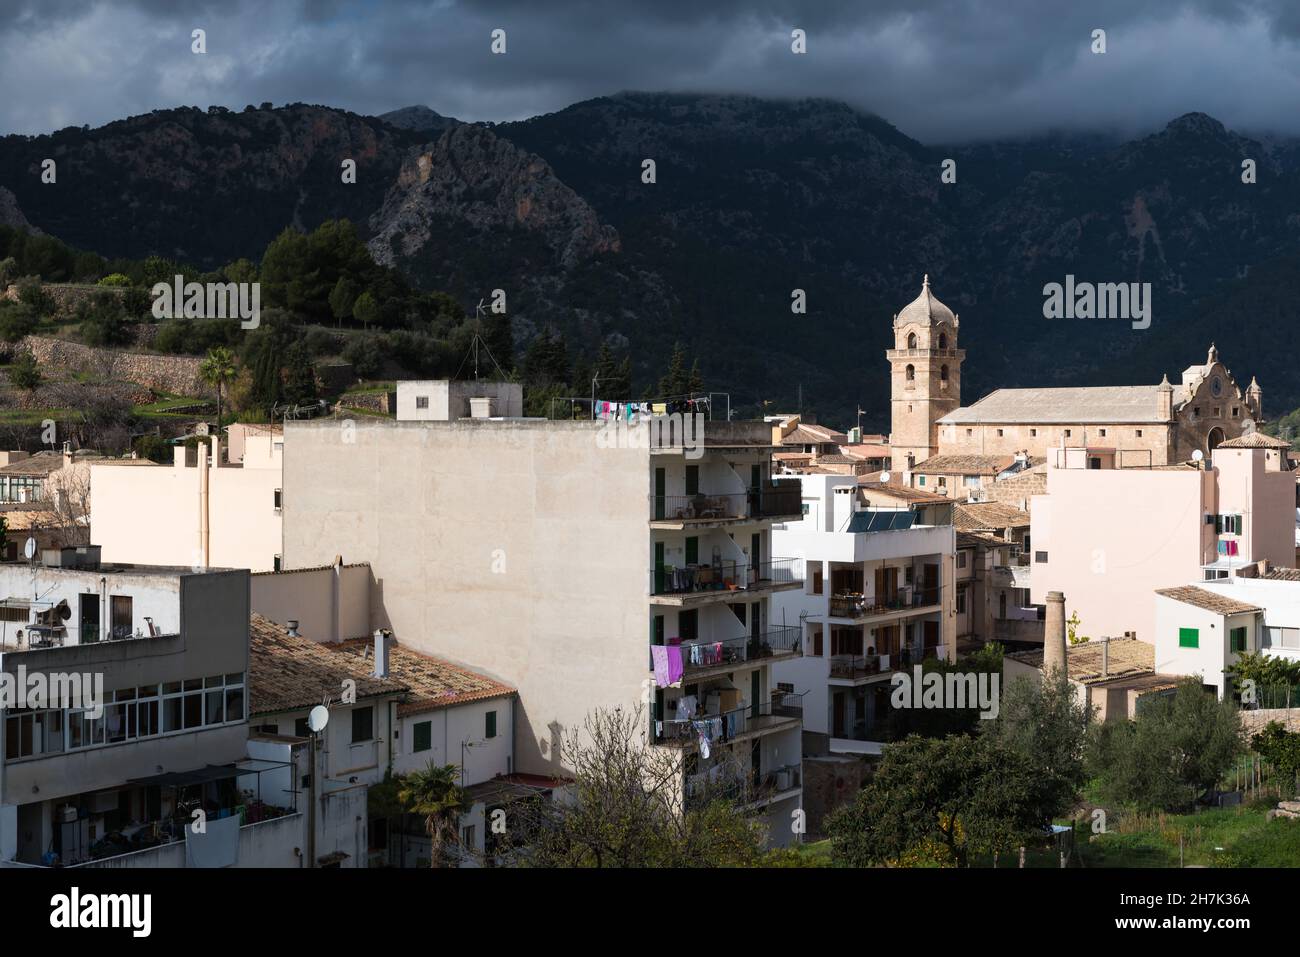 Soller, Spain - 12 25 2017:Panoramic view from above over Soller and the mountains Stock Photo